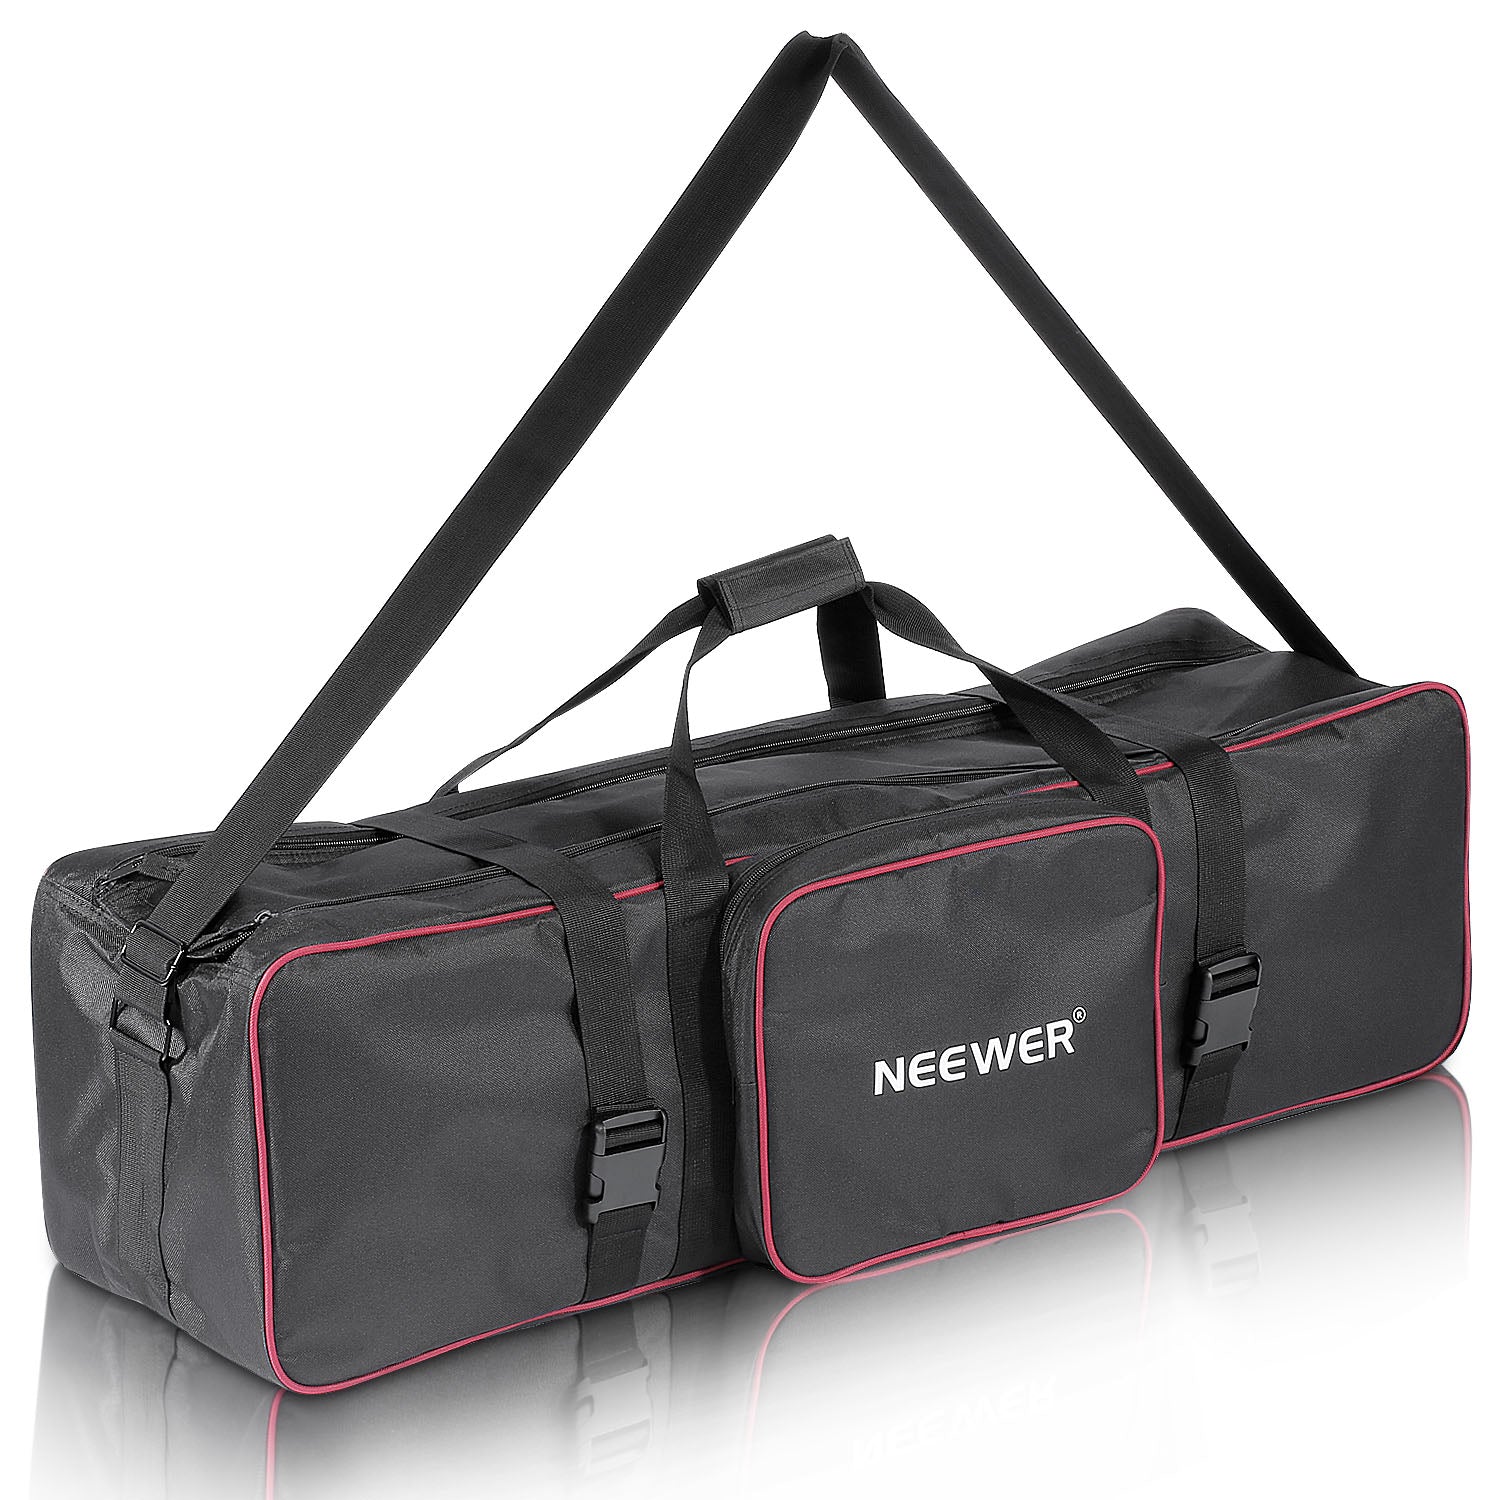 Neewer CB-05 35"x10"x10"/90 x 25 x 25 cm Photo Studio Equipment Large Carrying Bag with Strap